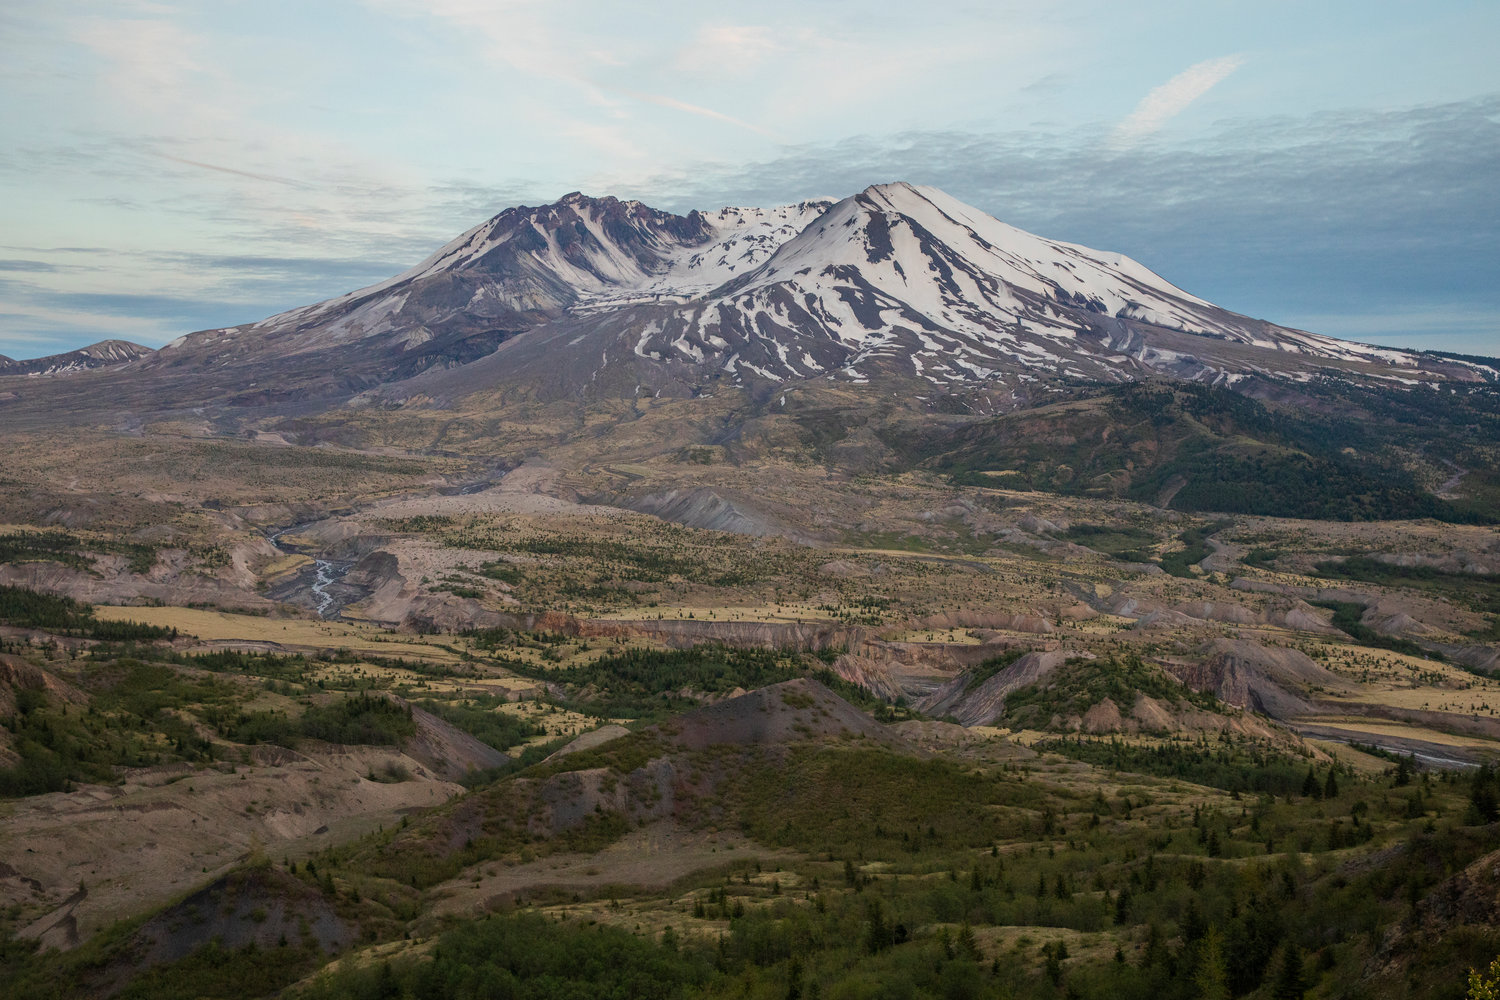 Mount St. Helens towers over the horizon on Wednesday.